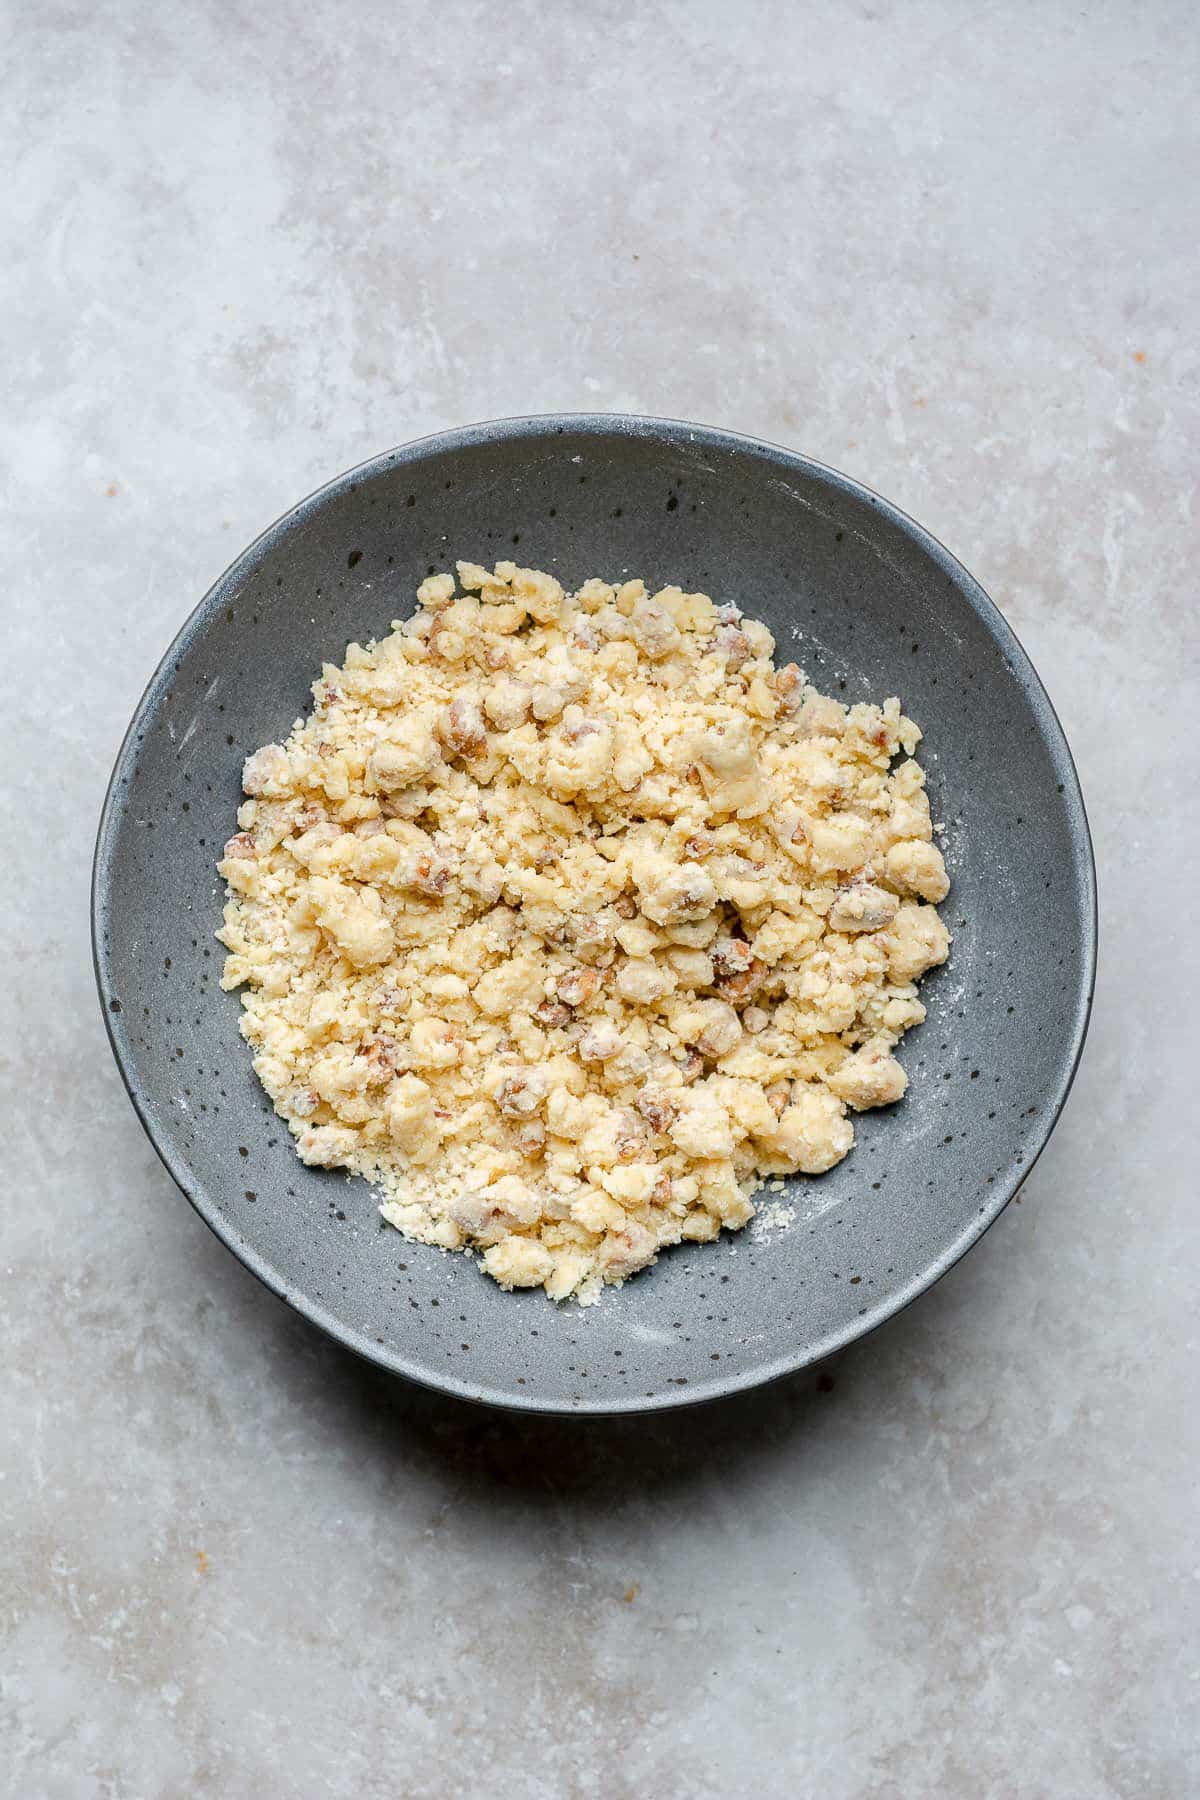 Mixing butter with flour and pecans in a bowl.